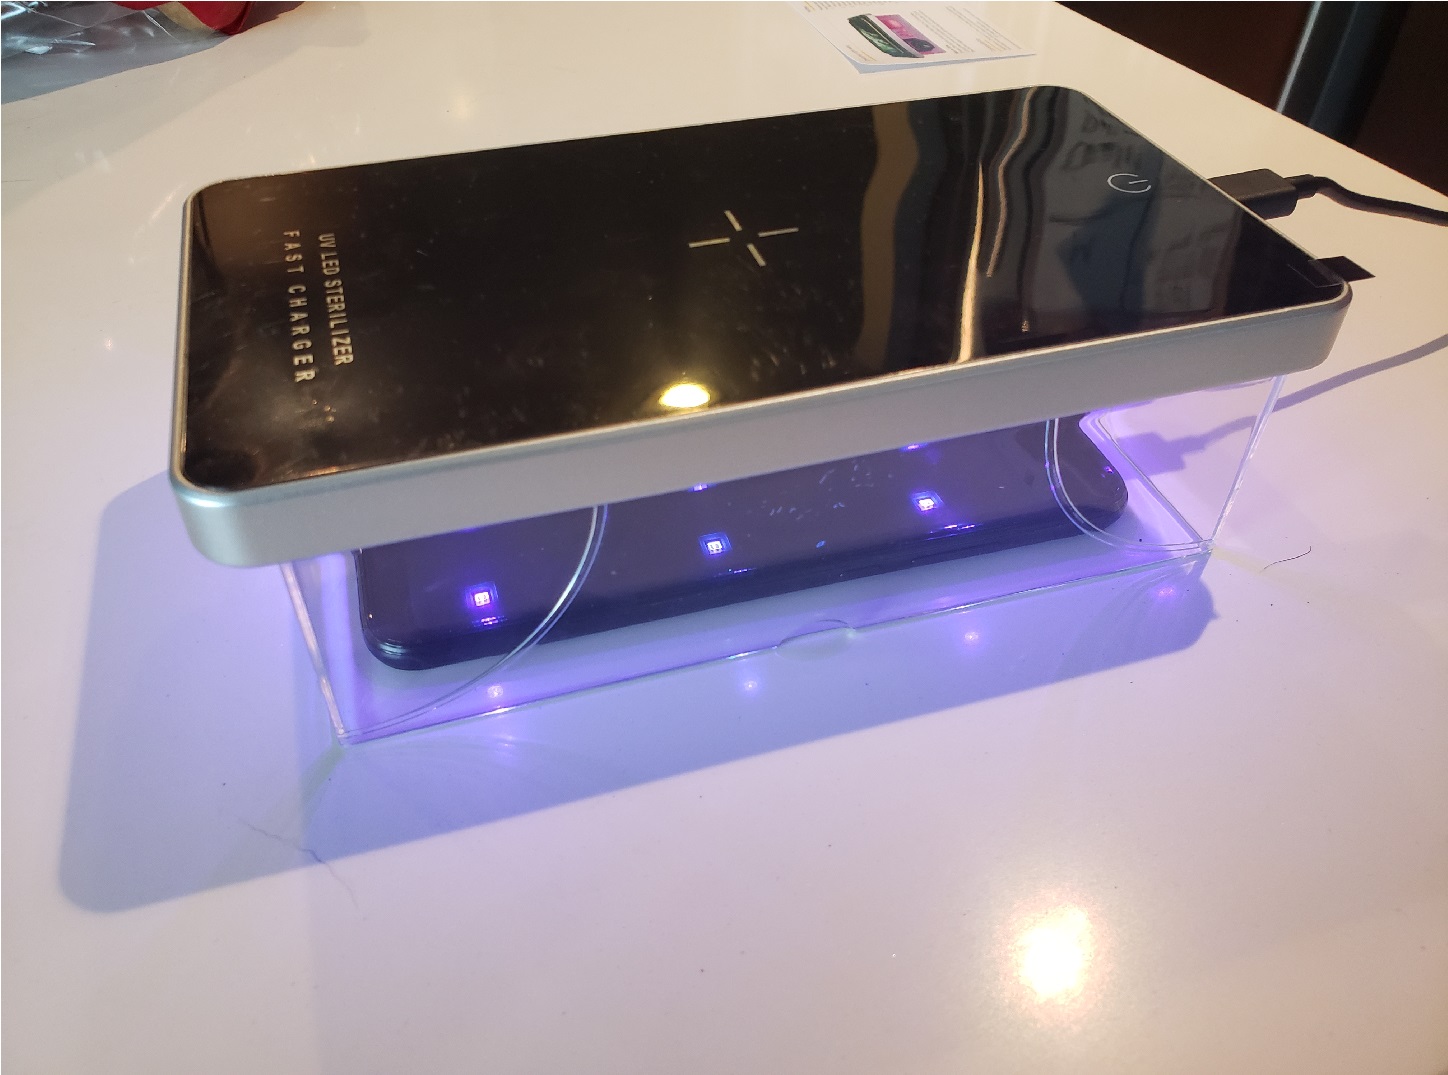 image of the UV sterilizer box placed over a phone and shining UV light on it